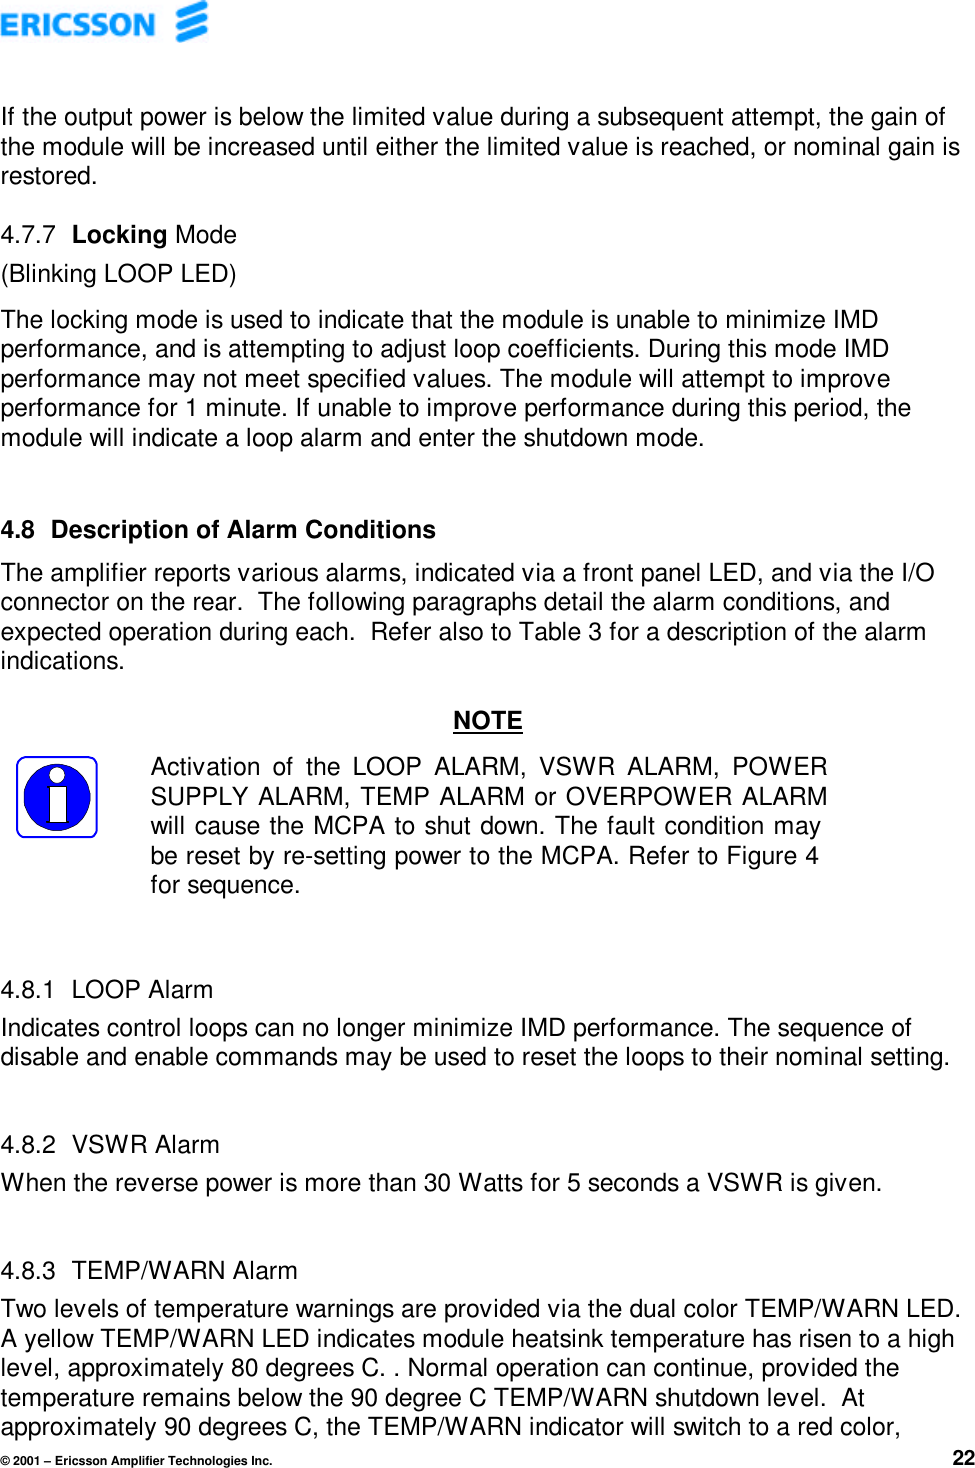 © 2001 – Ericsson Amplifier Technologies Inc. 22If the output power is below the limited value during a subsequent attempt, the gain ofthe module will be increased until either the limited value is reached, or nominal gain isrestored.4.7.7  Locking Mode(Blinking LOOP LED)The locking mode is used to indicate that the module is unable to minimize IMDperformance, and is attempting to adjust loop coefficients. During this mode IMDperformance may not meet specified values. The module will attempt to improveperformance for 1 minute. If unable to improve performance during this period, themodule will indicate a loop alarm and enter the shutdown mode.4.8  Description of Alarm ConditionsThe amplifier reports various alarms, indicated via a front panel LED, and via the I/Oconnector on the rear.  The following paragraphs detail the alarm conditions, andexpected operation during each.  Refer also to Table 3 for a description of the alarmindications.NOTEActivation of the LOOP ALARM, VSWR ALARM, POWERSUPPLY ALARM, TEMP ALARM or OVERPOWER ALARMwill cause the MCPA to shut down. The fault condition maybe reset by re-setting power to the MCPA. Refer to Figure 4for sequence.4.8.1  LOOP AlarmIndicates control loops can no longer minimize IMD performance. The sequence ofdisable and enable commands may be used to reset the loops to their nominal setting.4.8.2  VSWR AlarmWhen the reverse power is more than 30 Watts for 5 seconds a VSWR is given.4.8.3  TEMP/WARN AlarmTwo levels of temperature warnings are provided via the dual color TEMP/WARN LED.A yellow TEMP/WARN LED indicates module heatsink temperature has risen to a highlevel, approximately 80 degrees C. . Normal operation can continue, provided thetemperature remains below the 90 degree C TEMP/WARN shutdown level.  Atapproximately 90 degrees C, the TEMP/WARN indicator will switch to a red color,